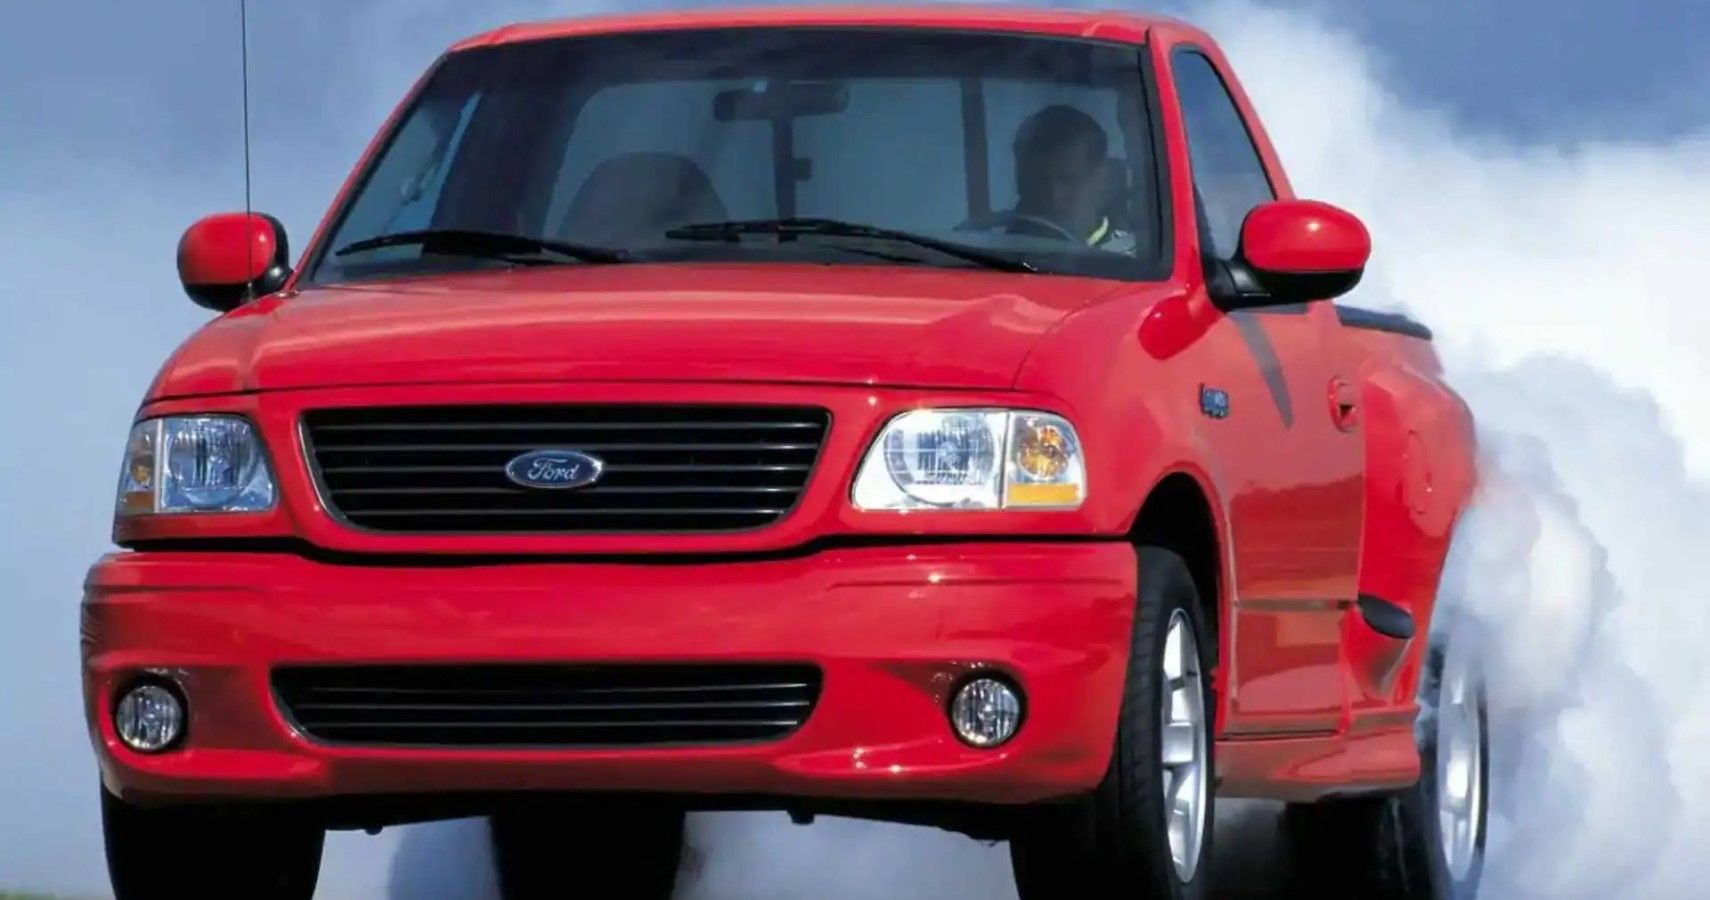 The Iconic Ford F-150 Lightning was the fastest truck of its time